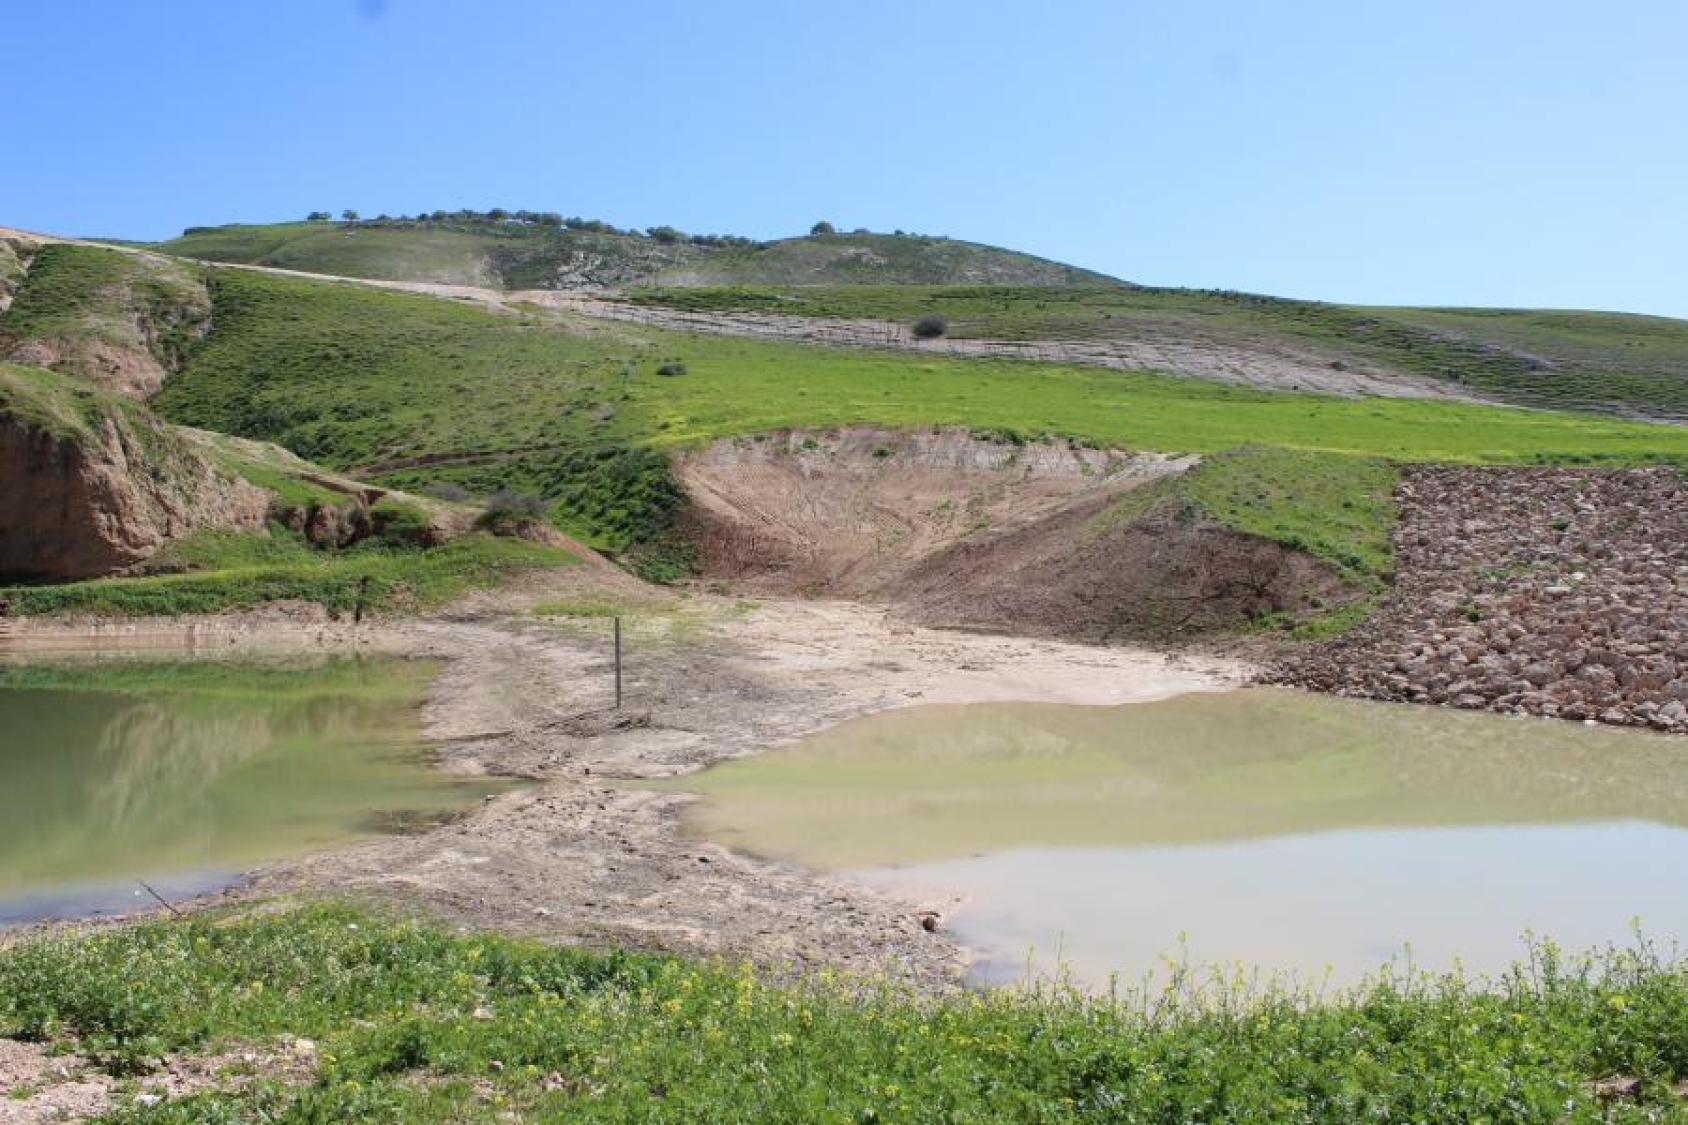 Green valley like location in jordan with water that has been harvested